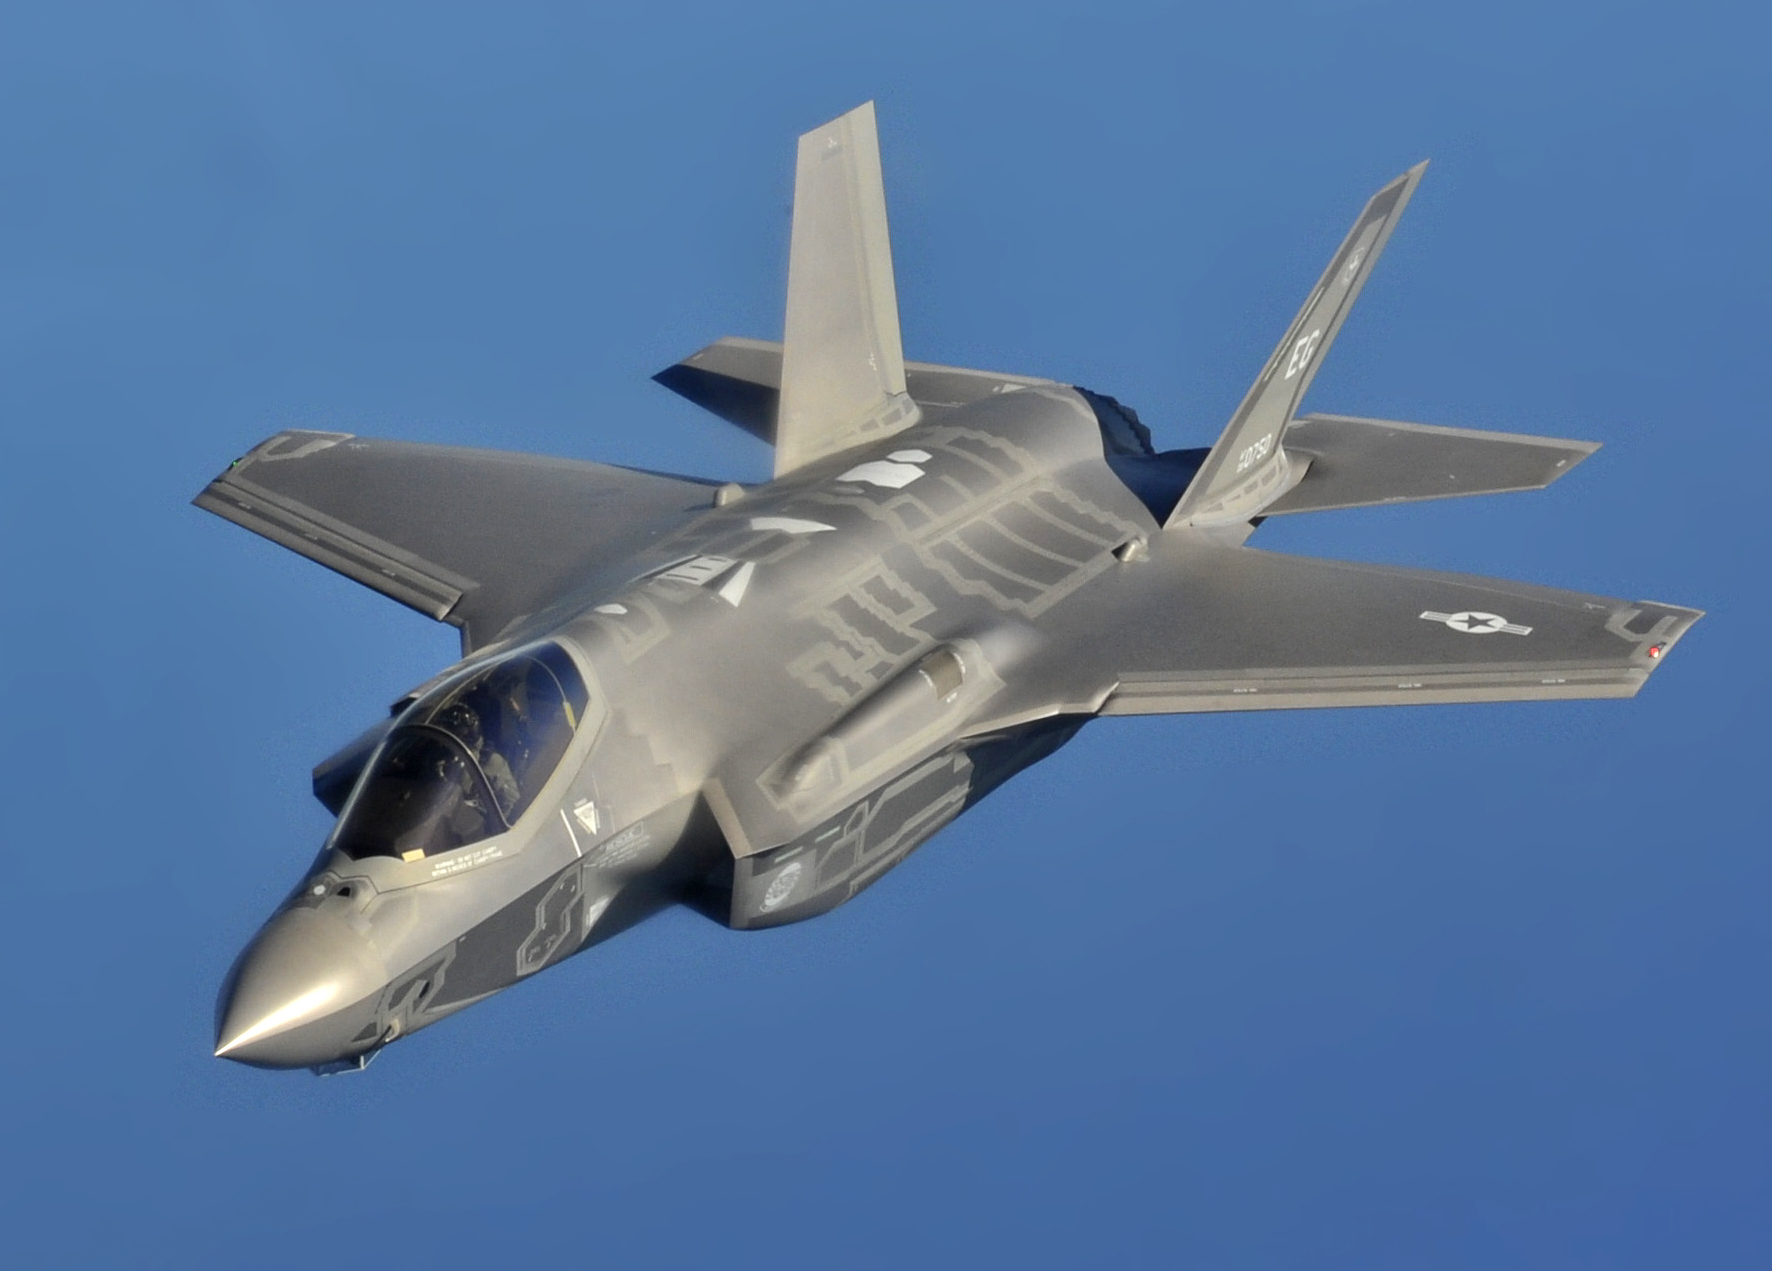 The Czech Republic has applied for the purchase of U.S. fifth generation fighters with F-35 Lightning II stealth technology